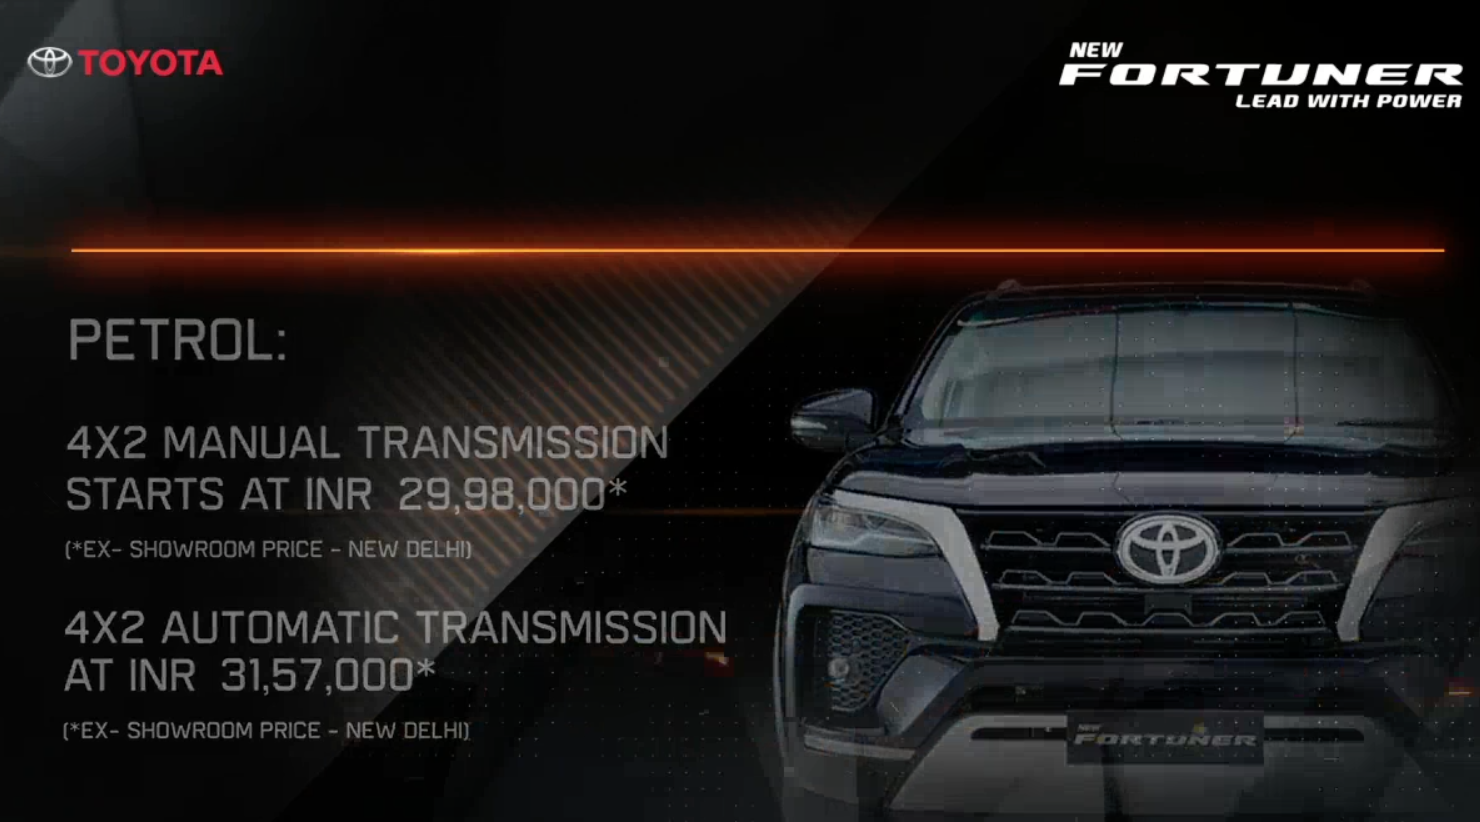 <p>Prices for the <a dir="ltr" href="https://twitter.com/hashtag/NewFortuner?src=hashtag_click">New Fortuner</a> start at Rs 29.98L for the petrol 4x2 MT, going up to Rs 37.43L for the diesel 4x4 AT.&nbsp;</p>